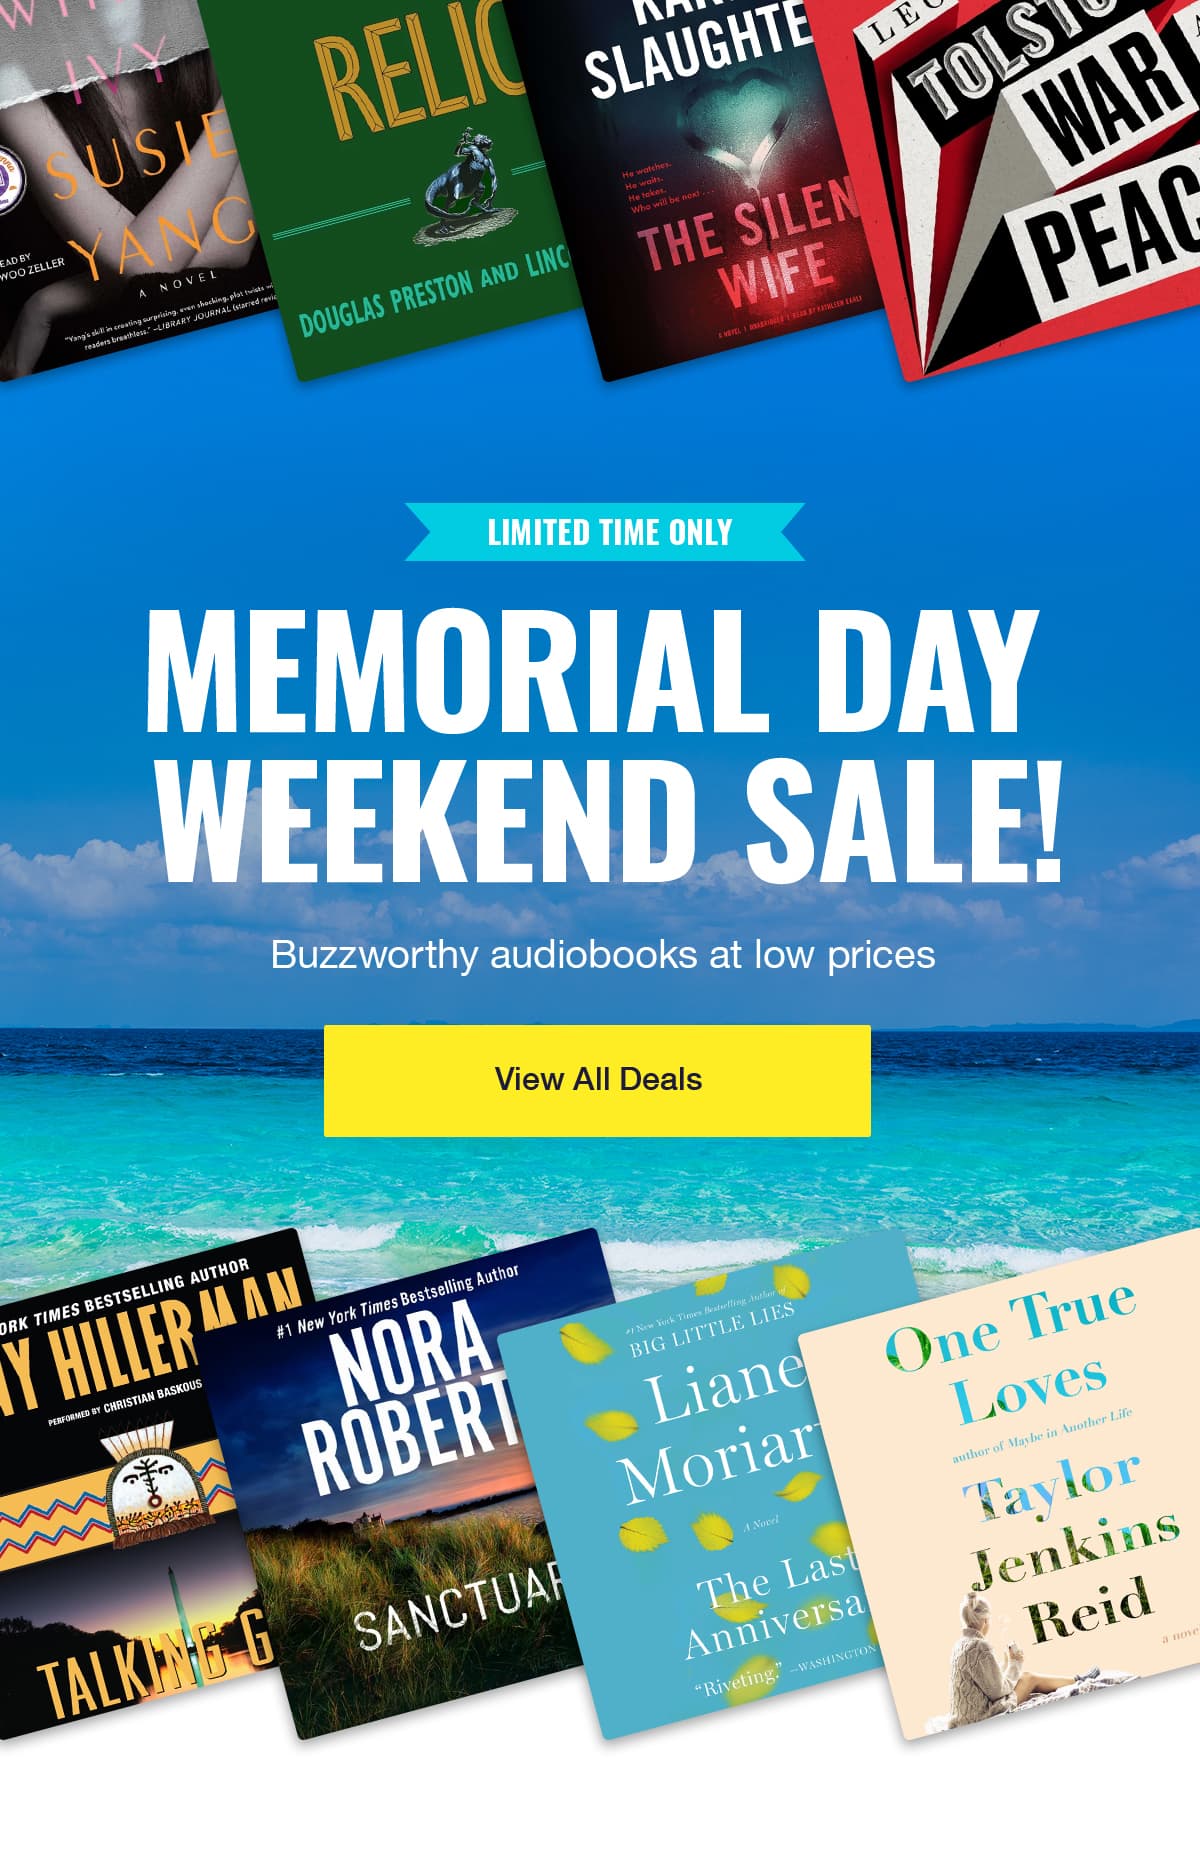 The Memorial Day Weekend Sale Is Here!